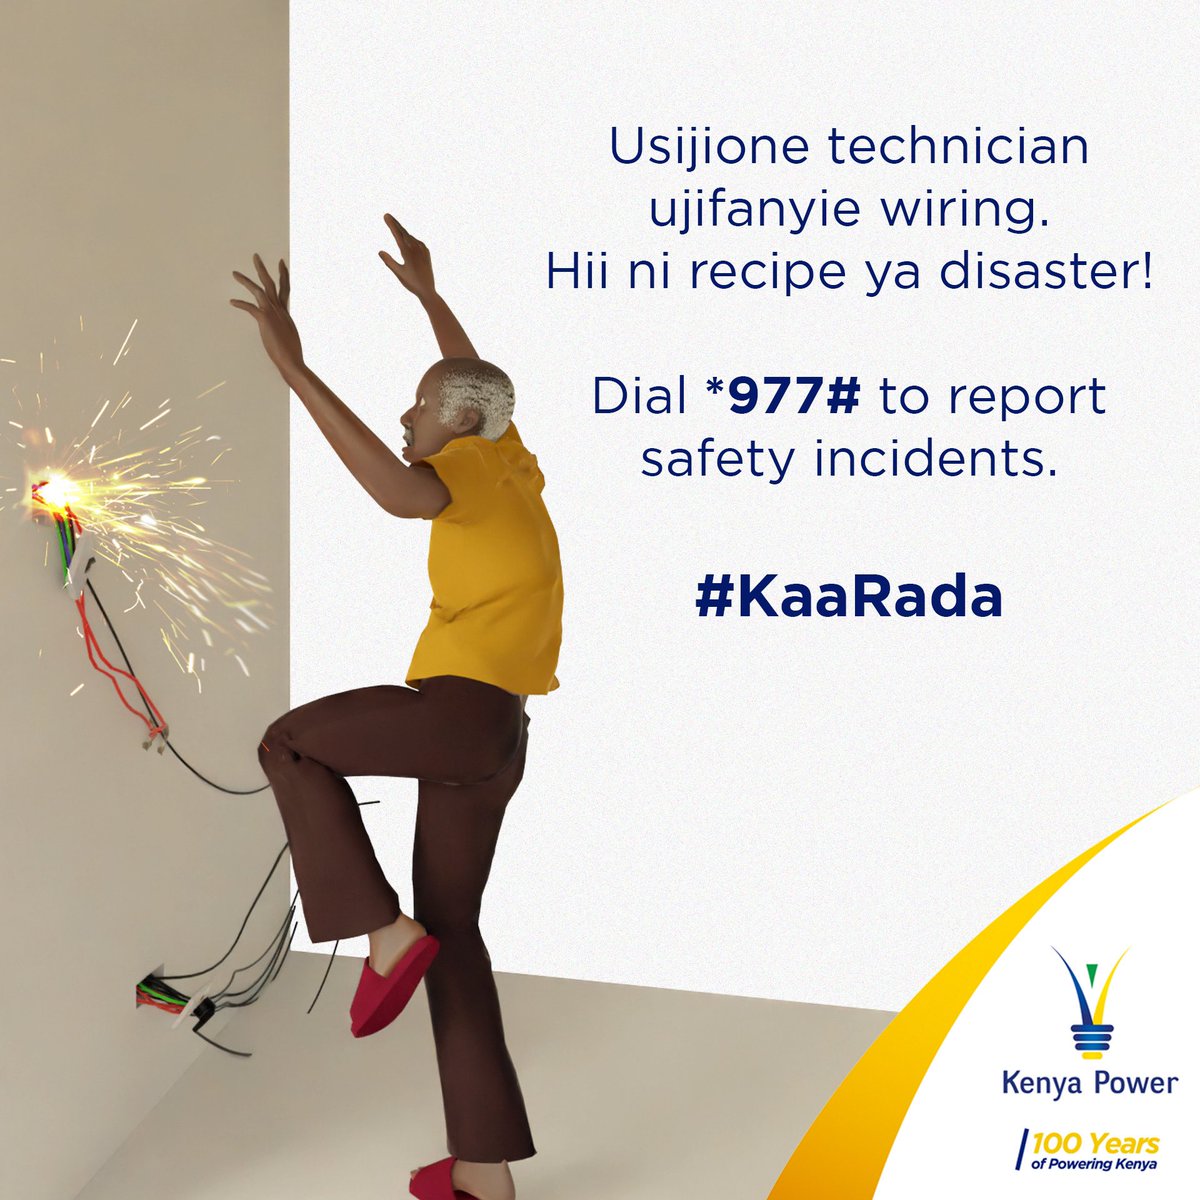 Story zingine wachia the experts. Always engage a licensed electrician and avoid quacks. A list of licensed electricians can be found on the epra website on epra.go.ke Dial *977# or visit the nearest Kenya Power office to report safety incidents. #KaaRada ^JC